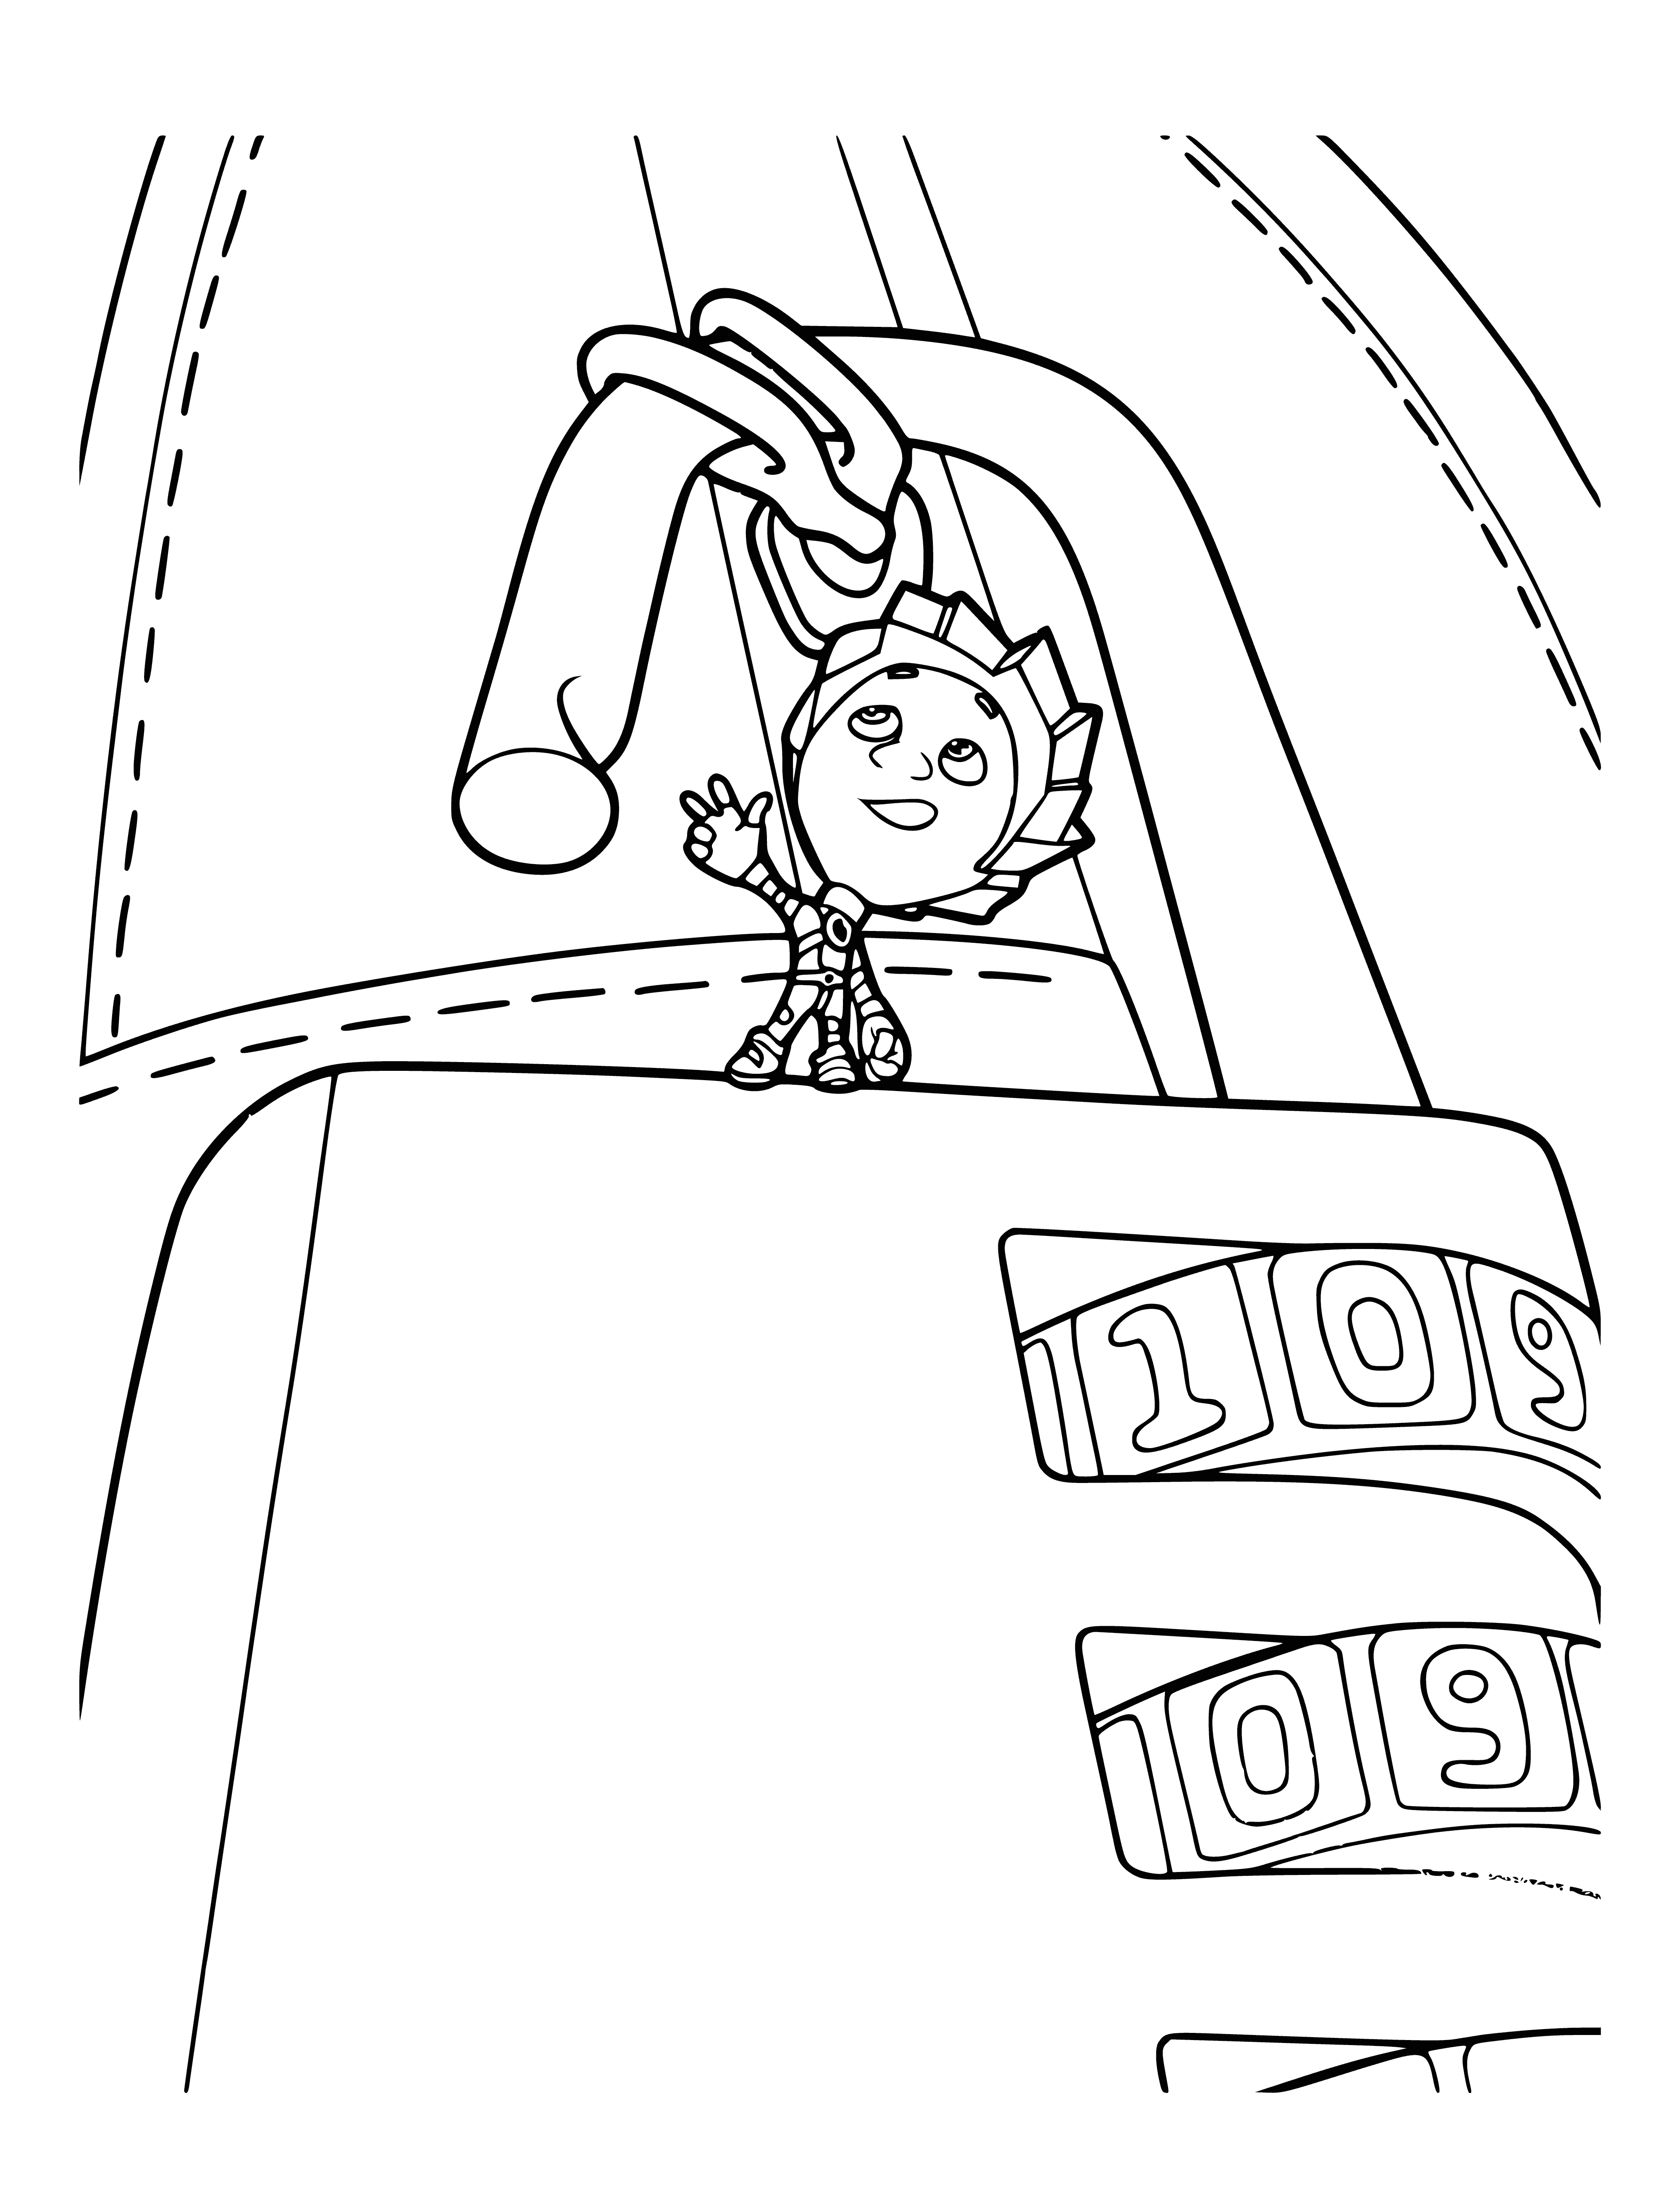 coloring page: Six 3-color locks with distinct patterns, each color has a unique order; first symbol goes at top when inputting code.